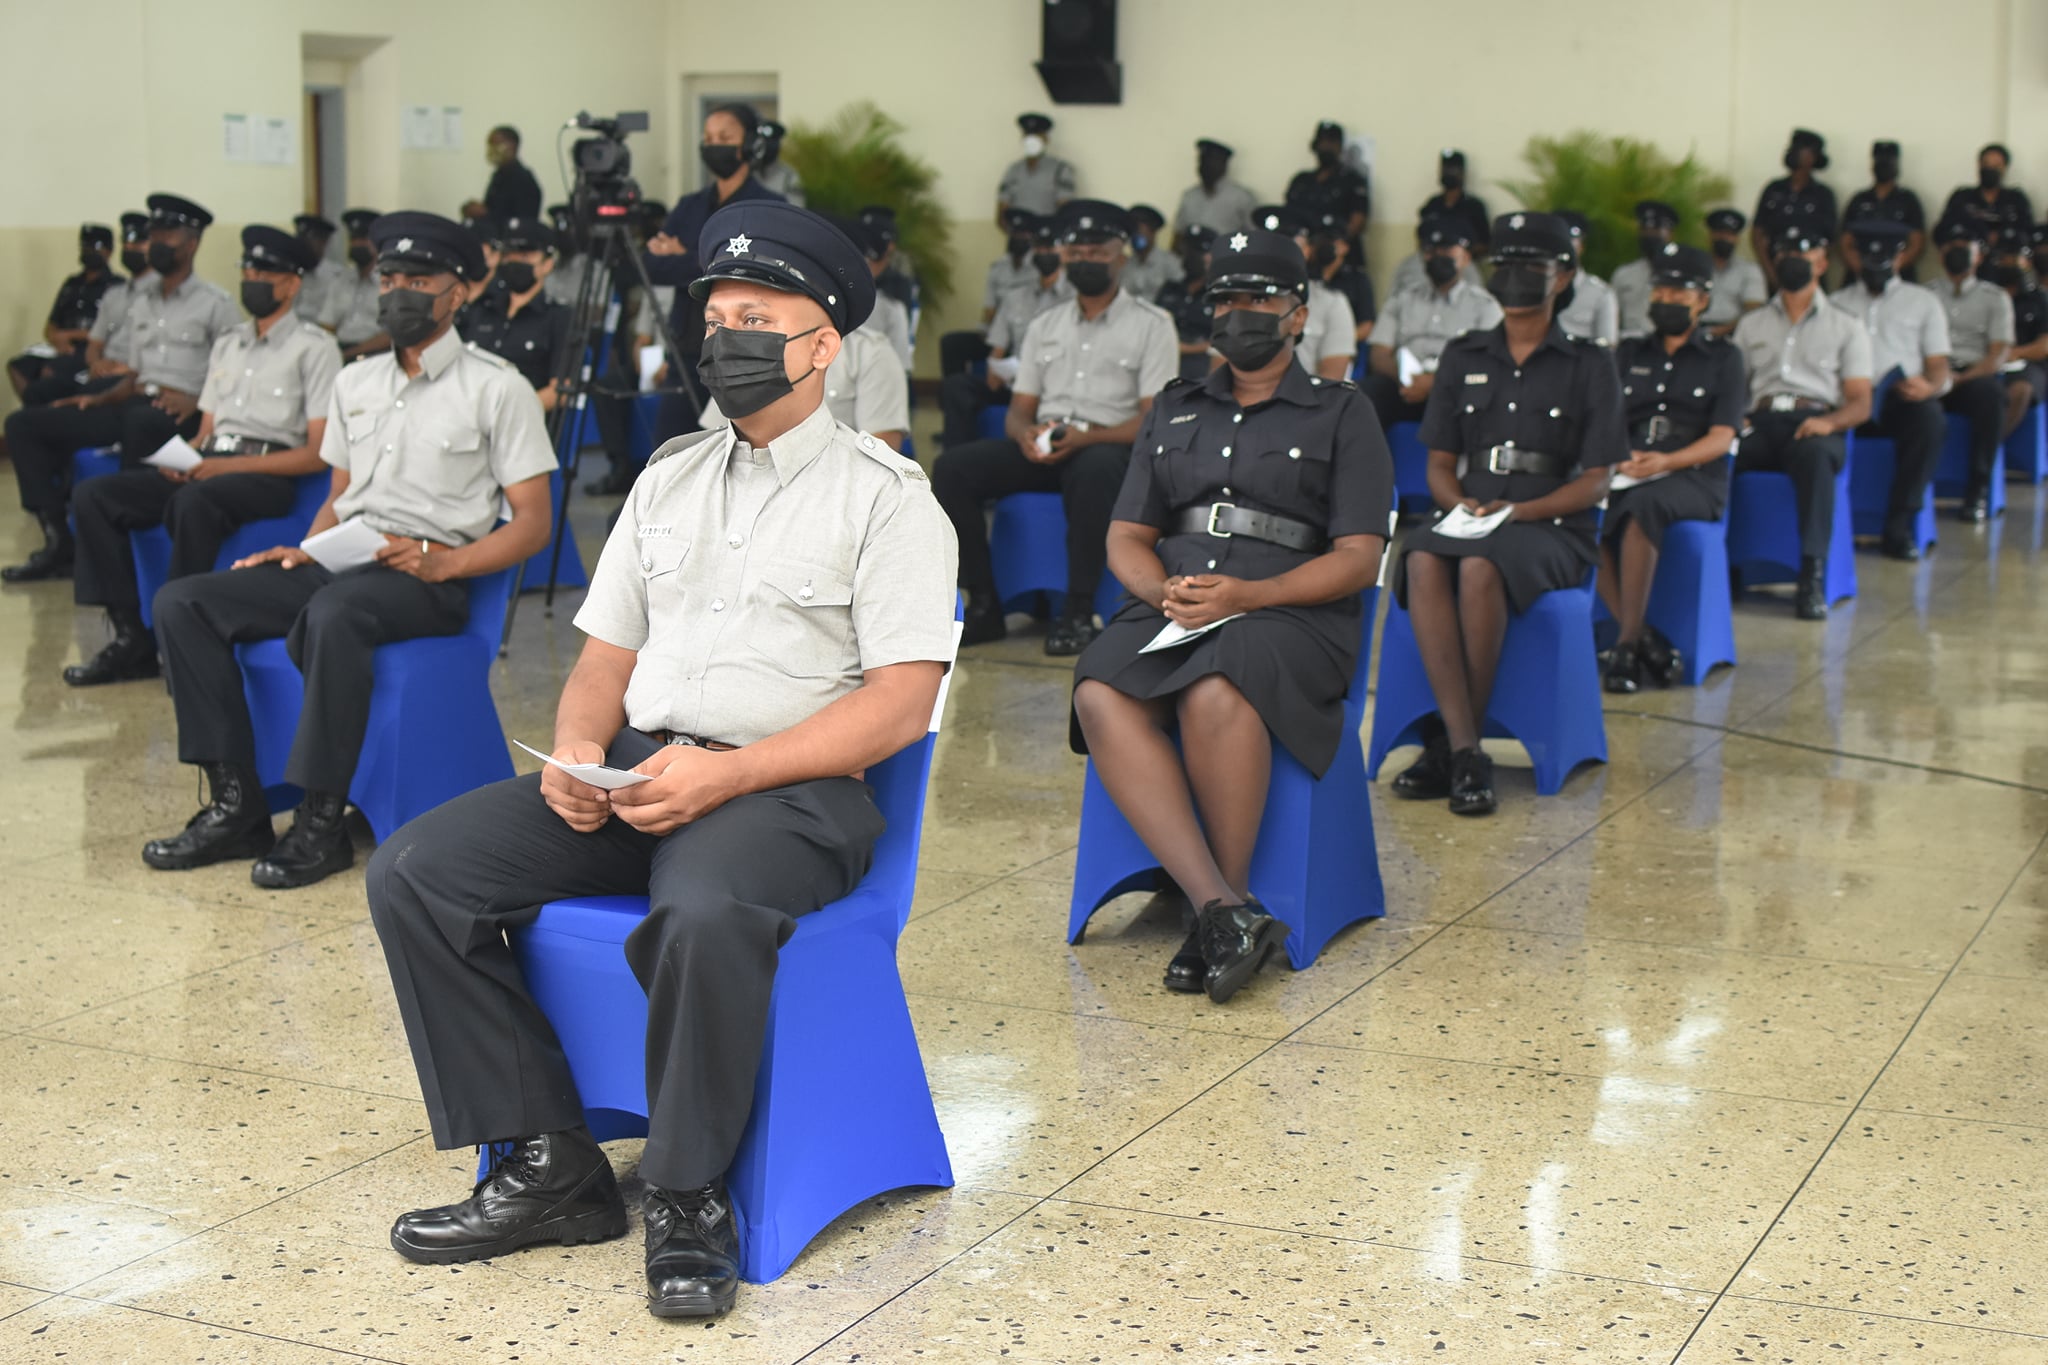 Second batch of police recruits graduate – encouraged to “Be the change you want to see”